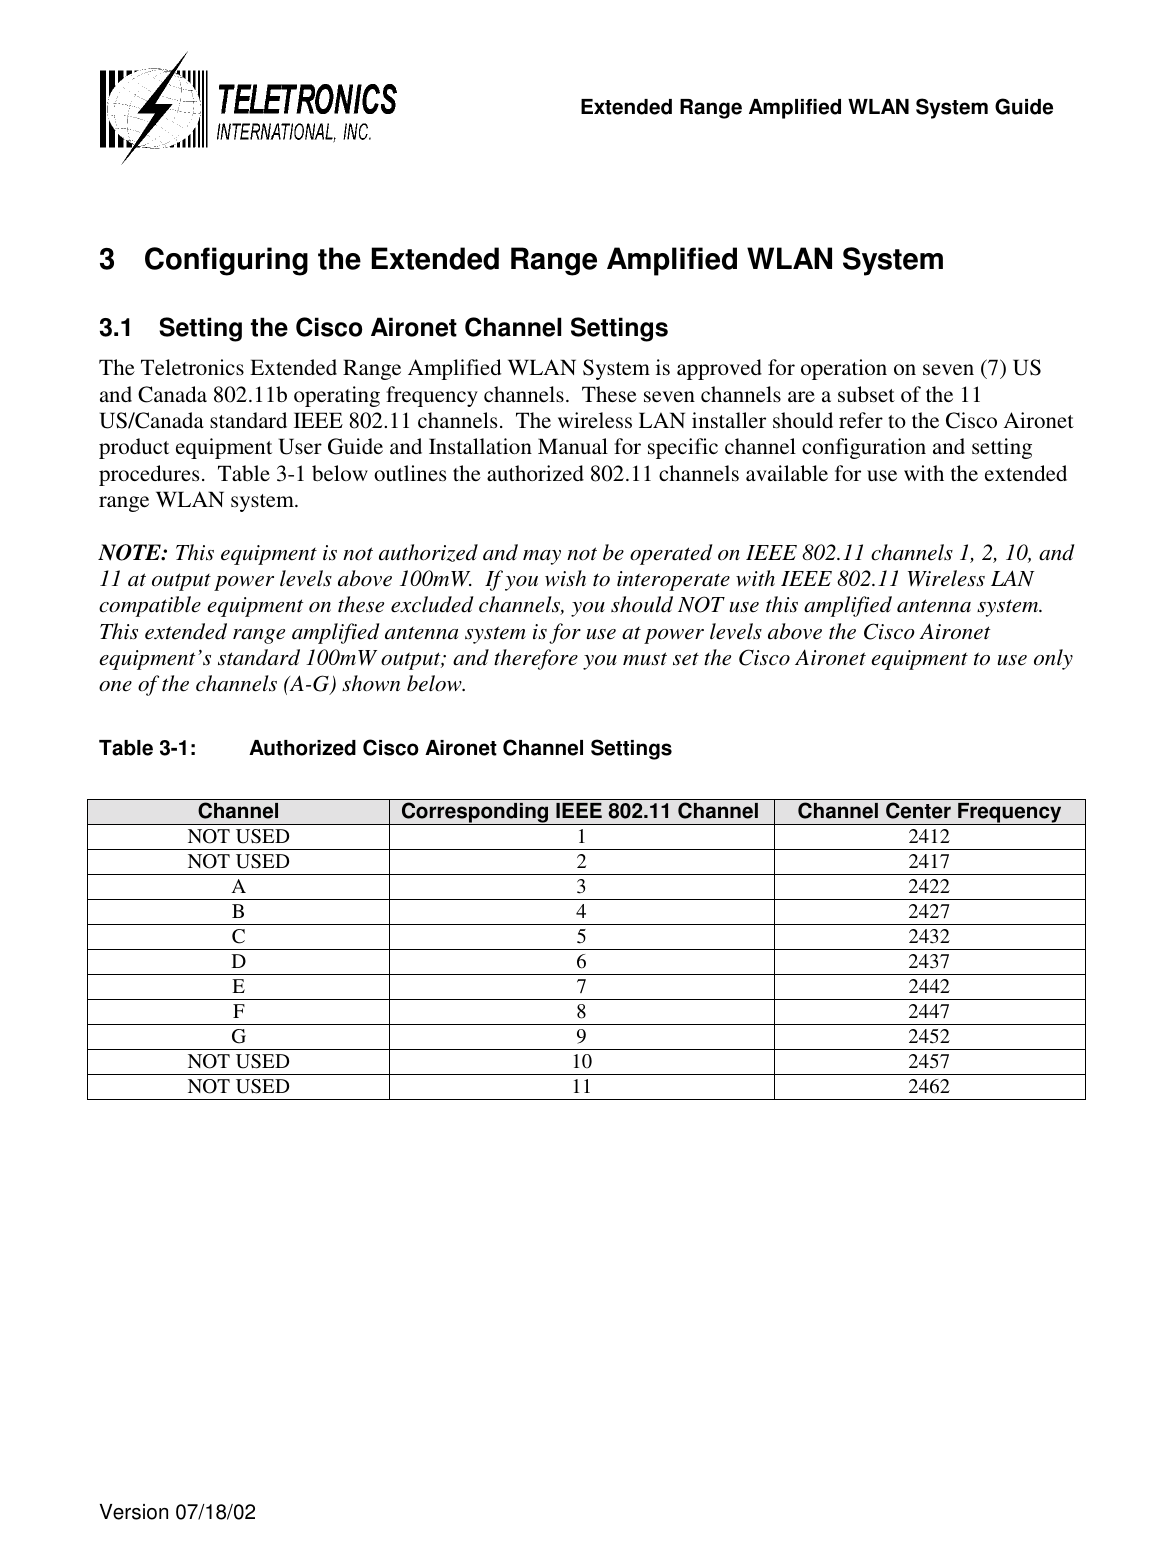   Extended Range Amplified WLAN System Guide  Version 07/18/02    3  Configuring the Extended Range Amplified WLAN System 3.1  Setting the Cisco Aironet Channel Settings The Teletronics Extended Range Amplified WLAN System is approved for operation on seven (7) US and Canada 802.11b operating frequency channels.  These seven channels are a subset of the 11 US/Canada standard IEEE 802.11 channels.  The wireless LAN installer should refer to the Cisco Aironet product equipment User Guide and Installation Manual for specific channel configuration and setting procedures.  Table 3-1 below outlines the authorized 802.11 channels available for use with the extended range WLAN system.  NOTE: This equipment is not authorized and may not be operated on IEEE 802.11 channels 1, 2, 10, and 11 at output power levels above 100mW.  If you wish to interoperate with IEEE 802.11 Wireless LAN compatible equipment on these excluded channels, you should NOT use this amplified antenna system.  This extended range amplified antenna system is for use at power levels above the Cisco Aironet equipment’s standard 100mW output; and therefore you must set the Cisco Aironet equipment to use only one of the channels (A-G) shown below.  Table 3-1:  Authorized Cisco Aironet Channel Settings  Channel  Corresponding IEEE 802.11 Channel  Channel Center Frequency NOT USED  1  2412 NOT USED  2  2417 A 3 2422 B 4 2427 C 5 2432 D 6 2437 E 7 2442 F 8 2447 G 9 2452 NOT USED  10  2457 NOT USED  11  2462  